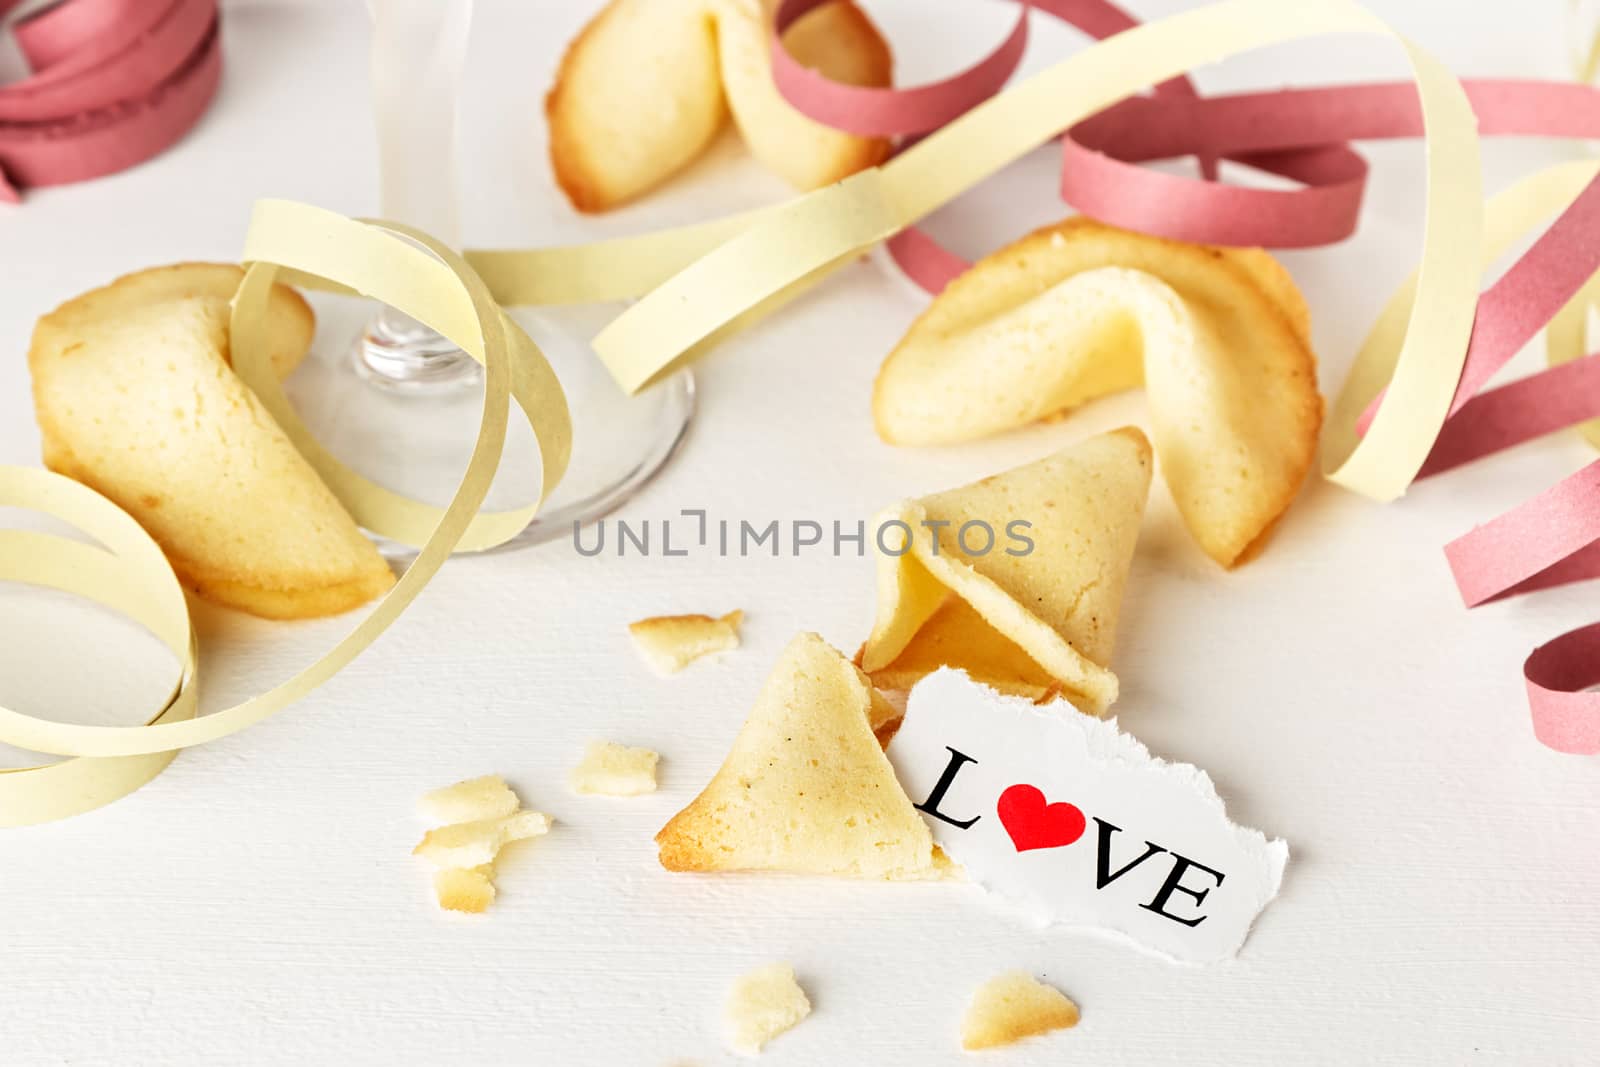 Cookies shaped like tortellini with the word love written on a paper and a glass of champagne with streamers.Horizontal image.